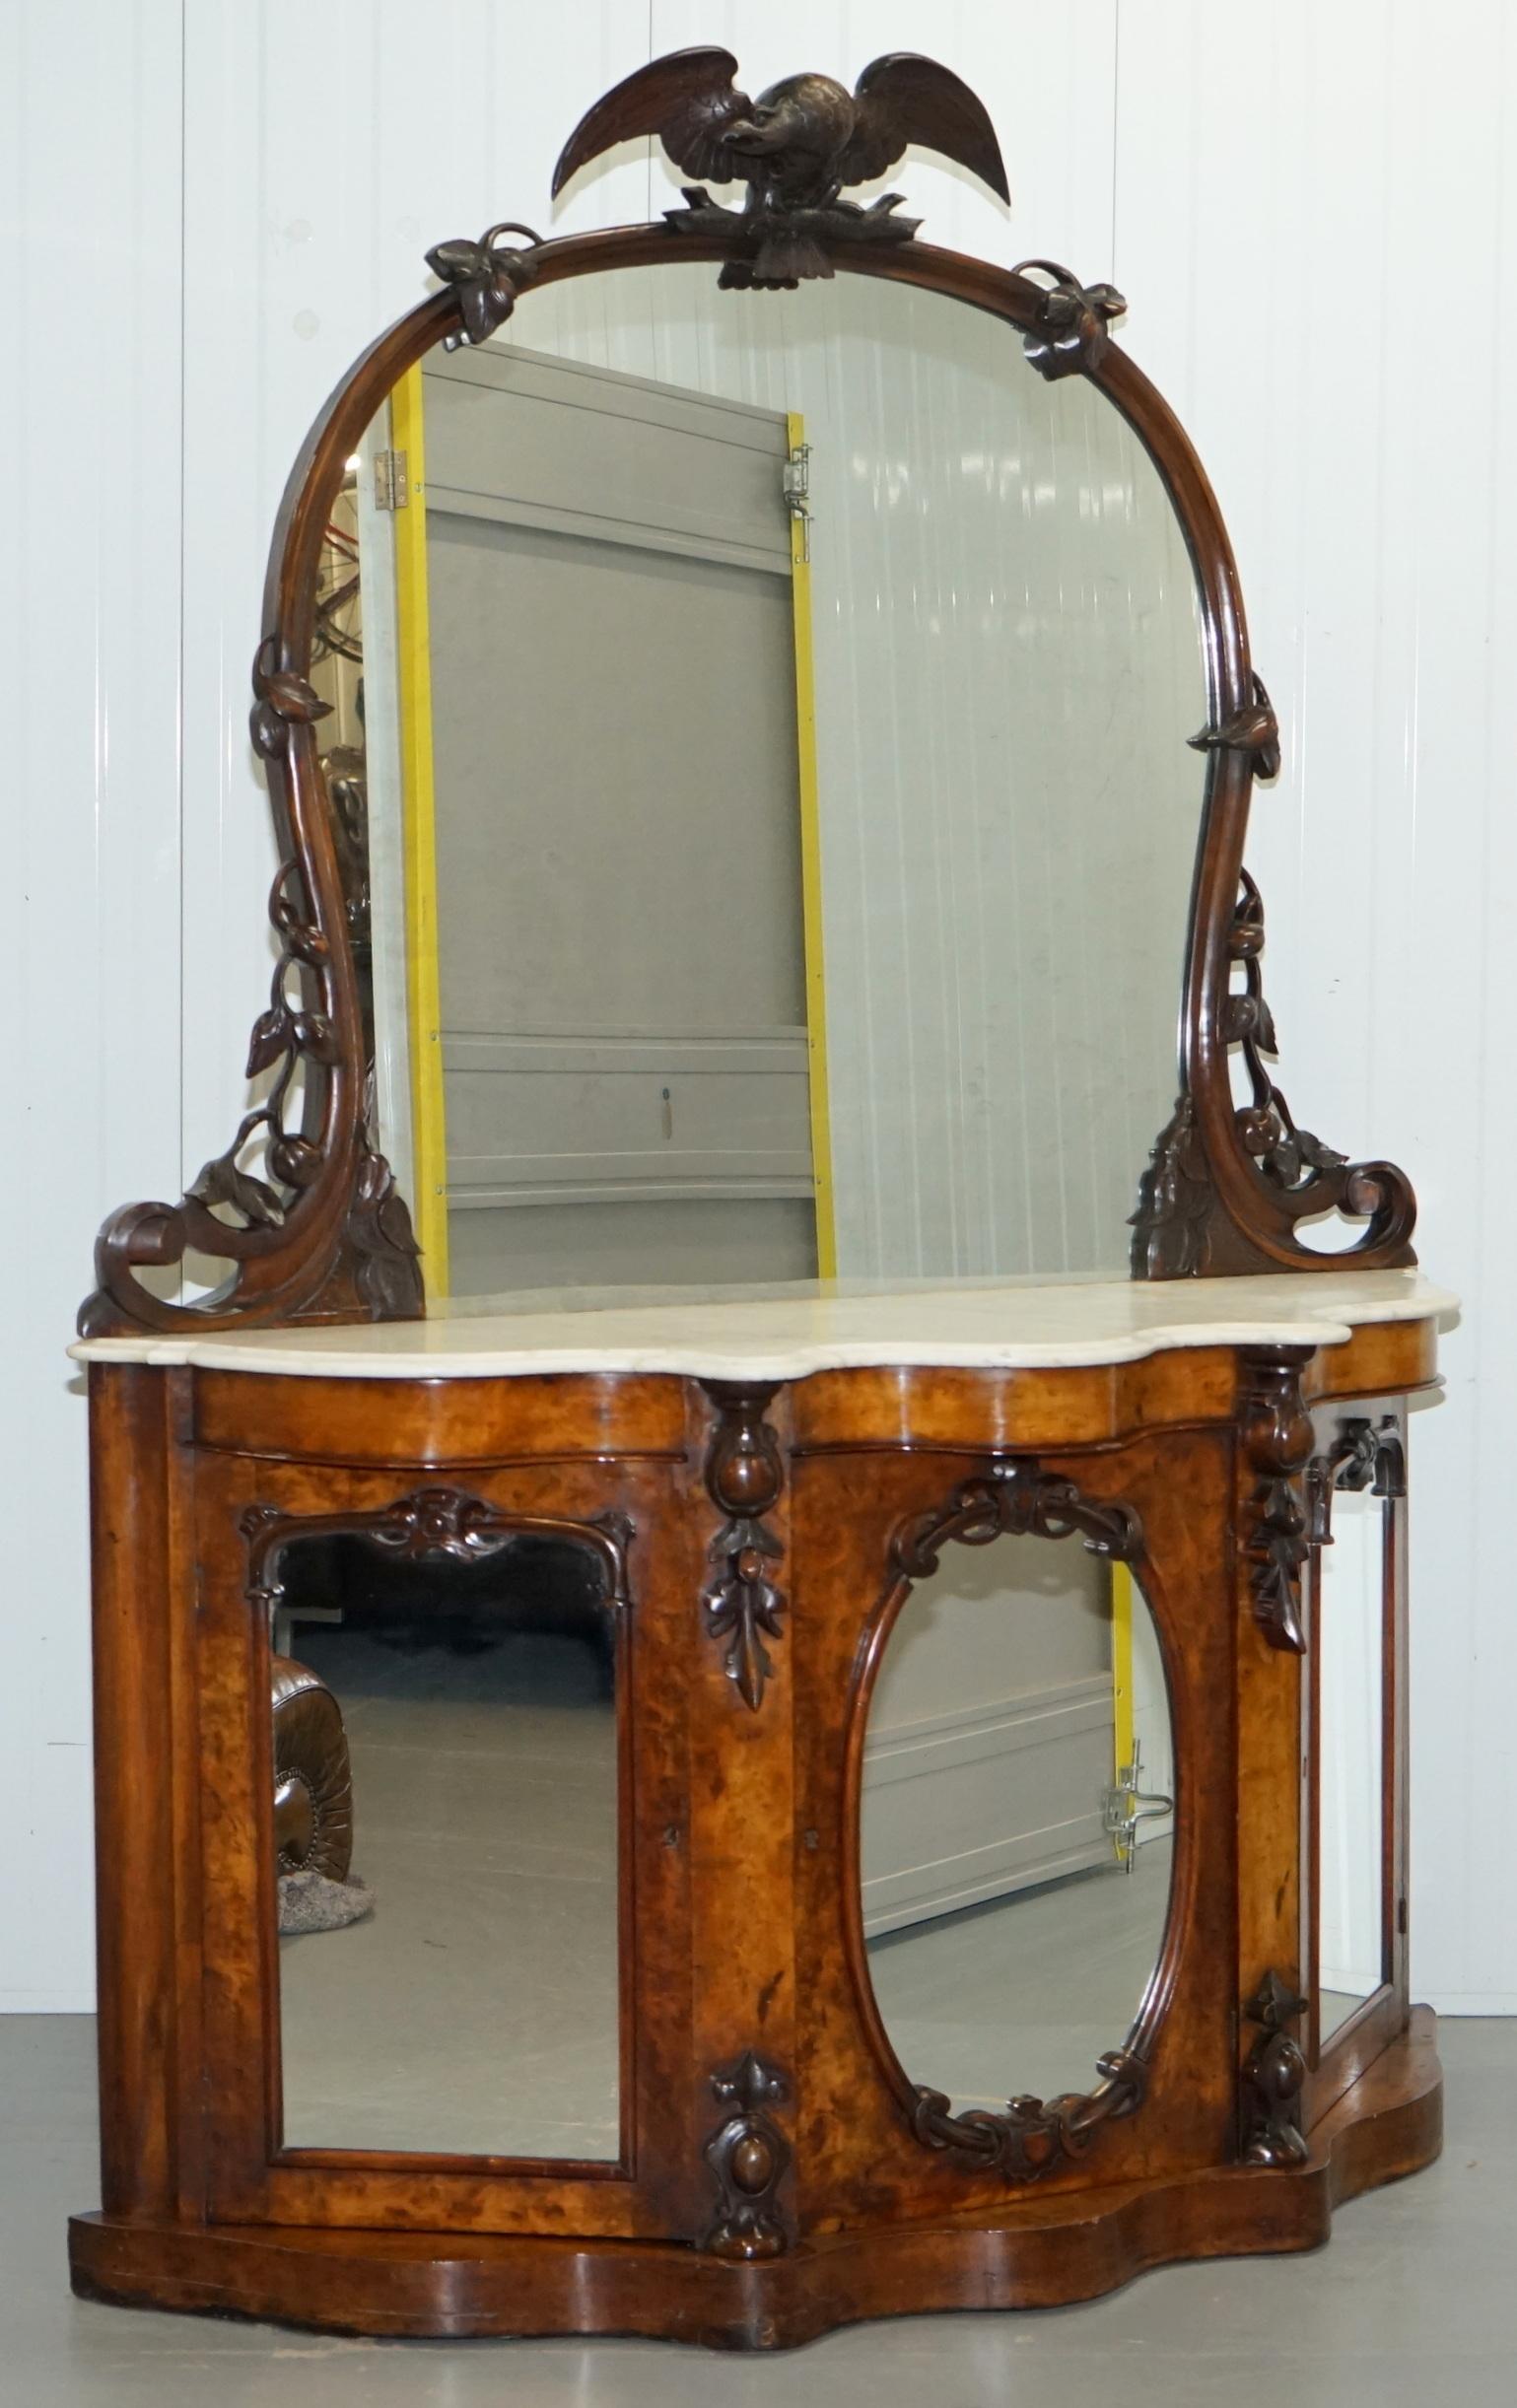 We are delighted to offer for sale this very ornate handmade Victorian walnut chiffonier sideboard with original plate glass and marble top

A very good looking and well-made piece, the walnut veneer is in fine order throughout, the plate glass is